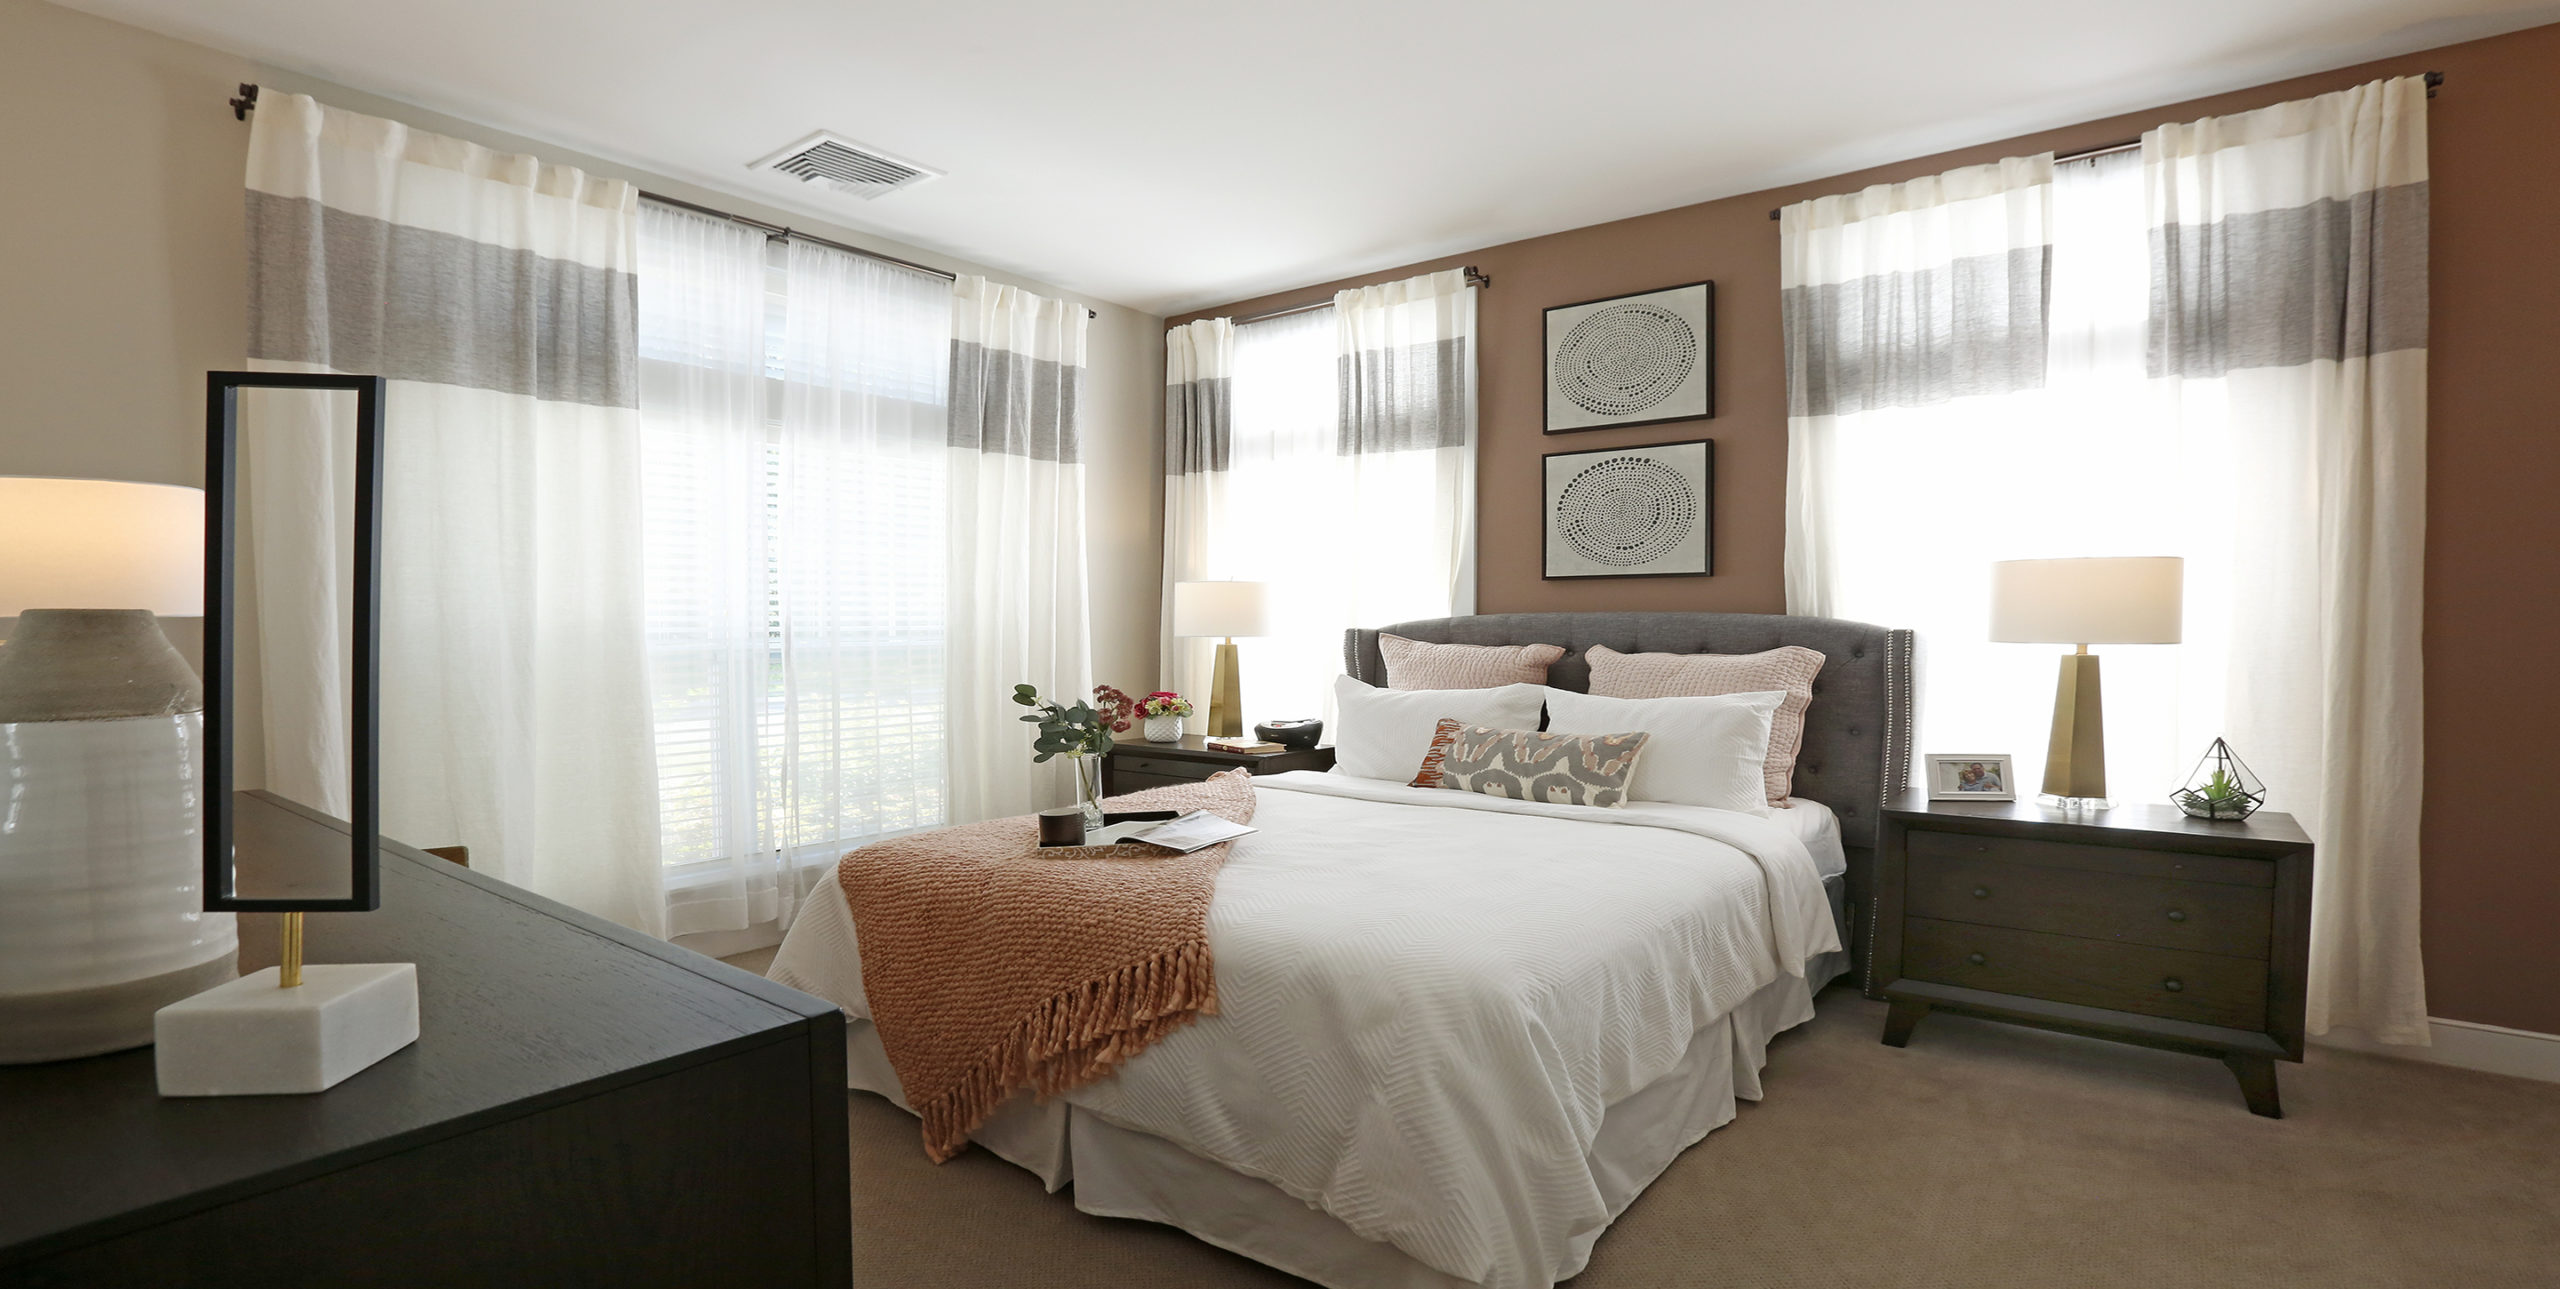 Bedroom showing a queen bed, table, and dresser in Brightview Senior Living in Sayville, NY